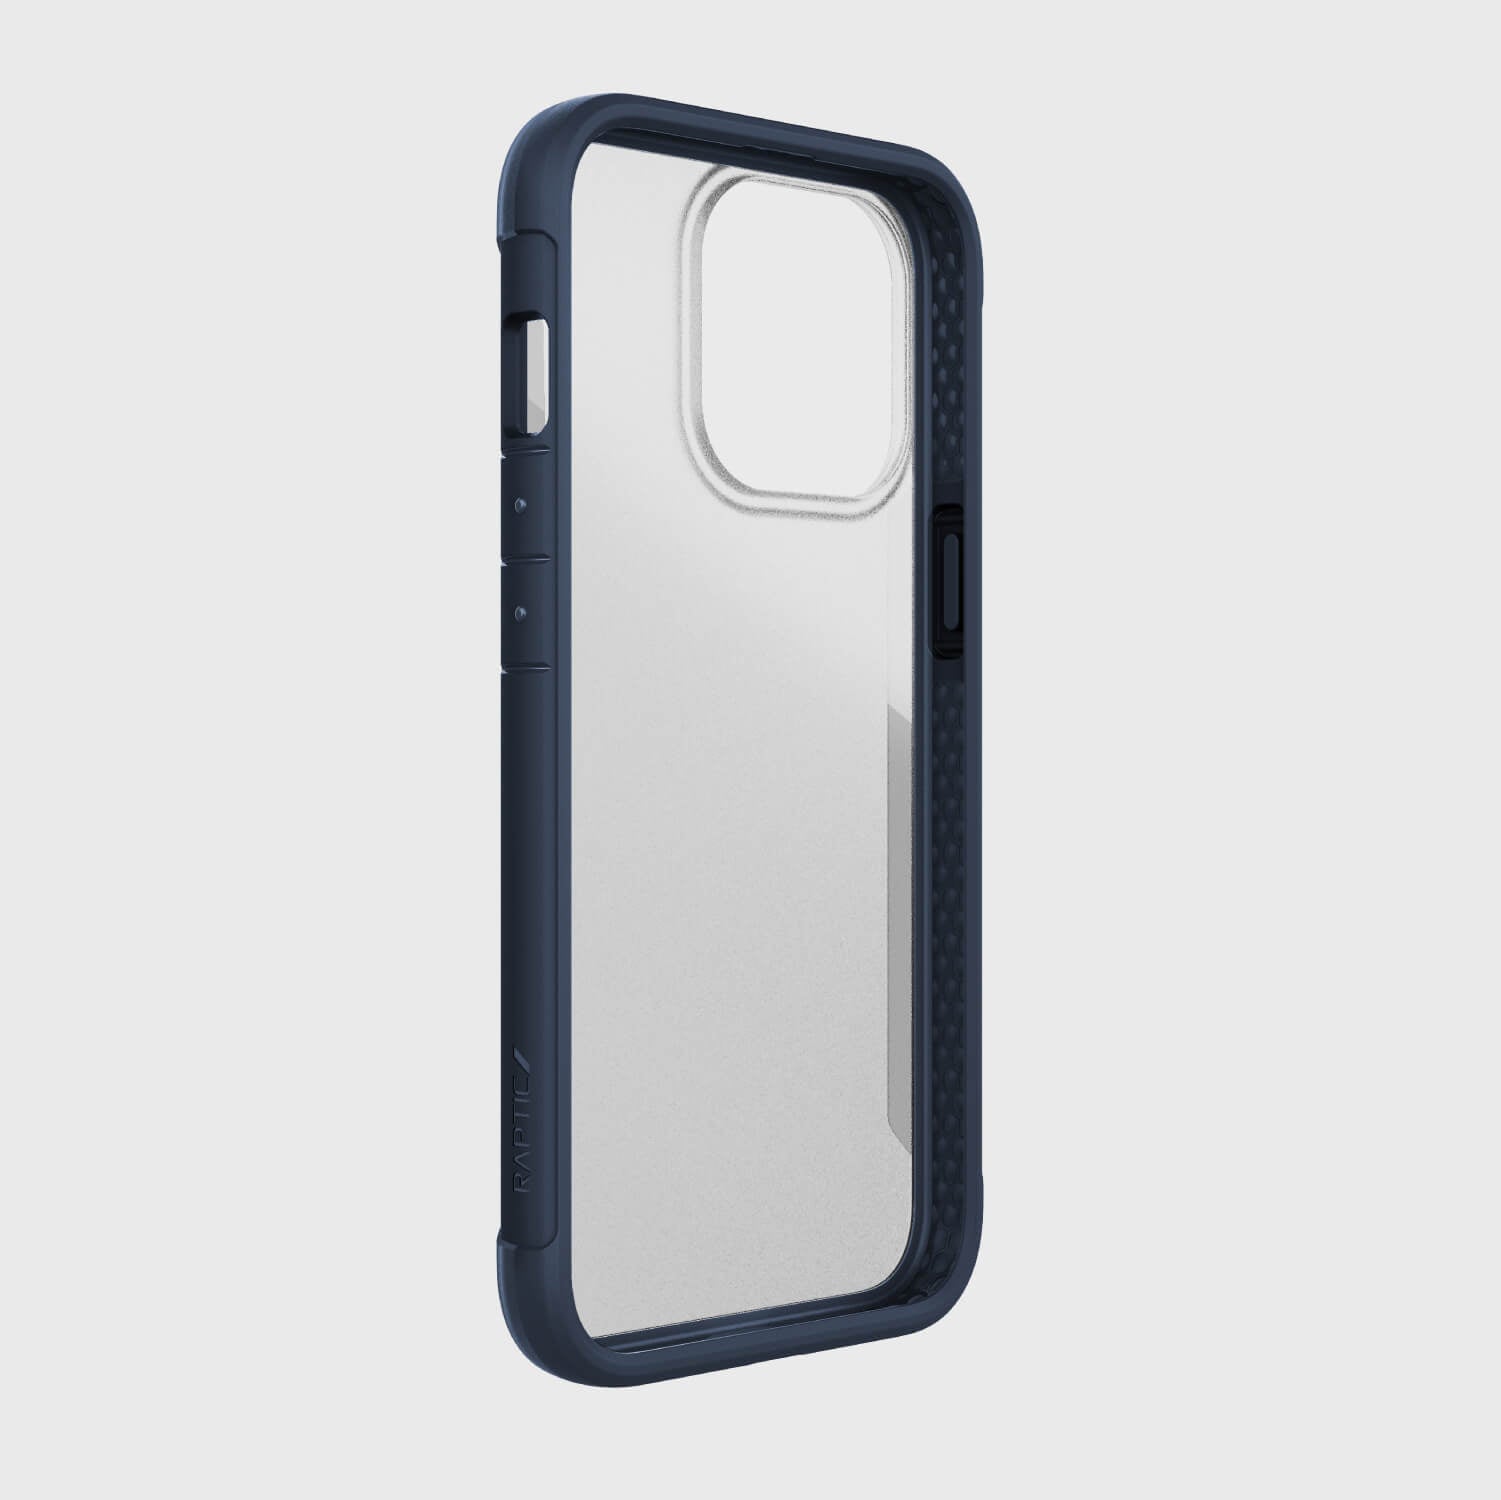 The eco-friendly back view of an iPhone 13 Pro Case - TERRAIN in blue.